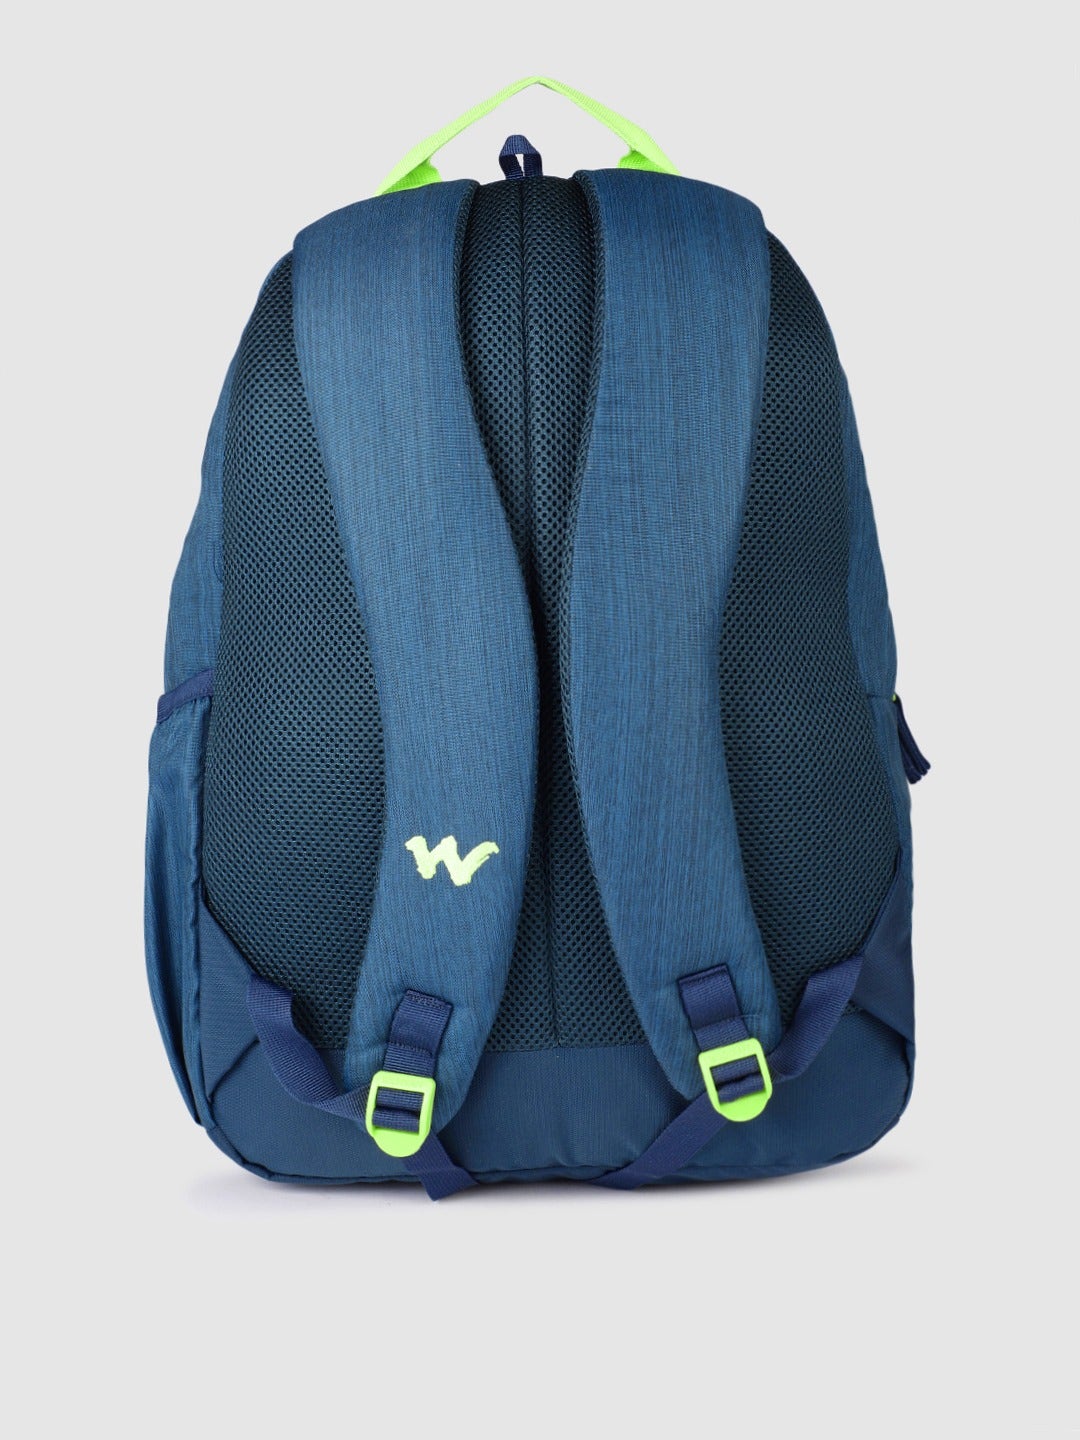 Wildcraft 30 Ltrs Blaze 1 98 Printed Casual  Backpack (12267)(HxWxD : 18x12.5x7.5)(inches)